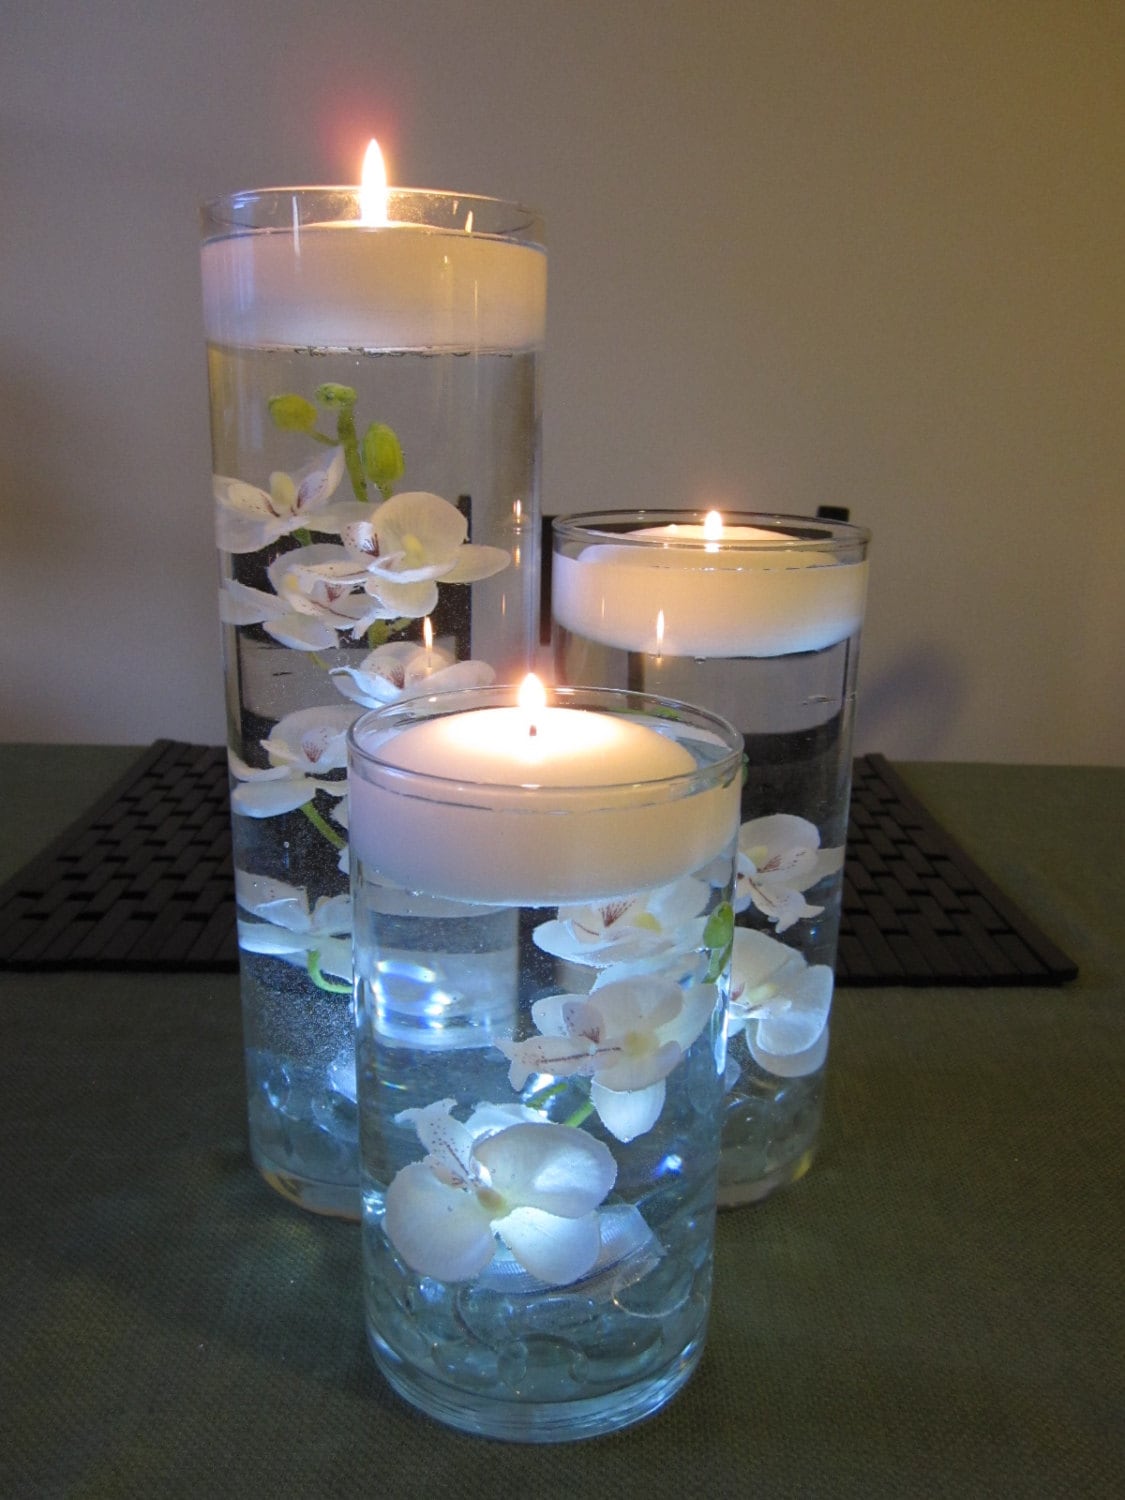 White Orchid Floating Candle Wedding Centerpiece Decor